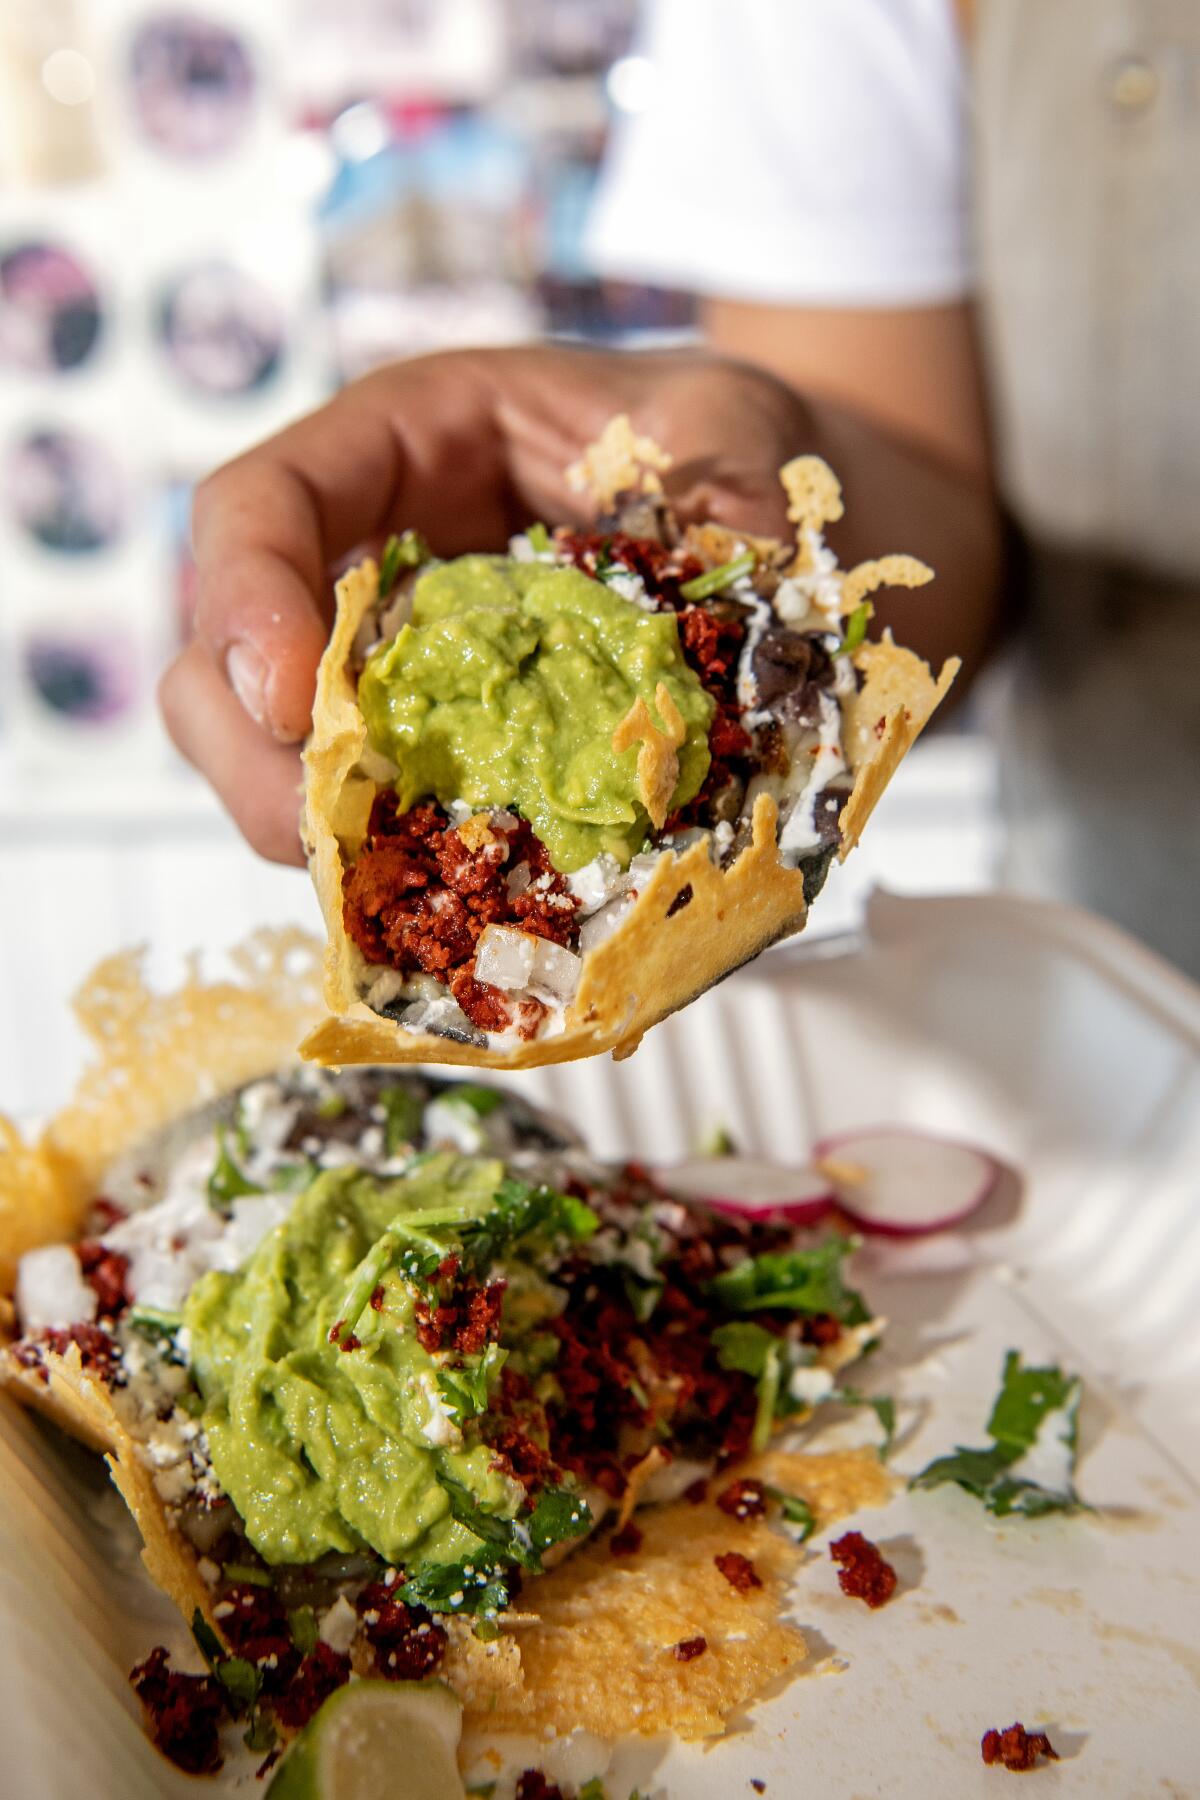 A hand holds a loaded taco with guacamole over a paper plate, on which rests another taco